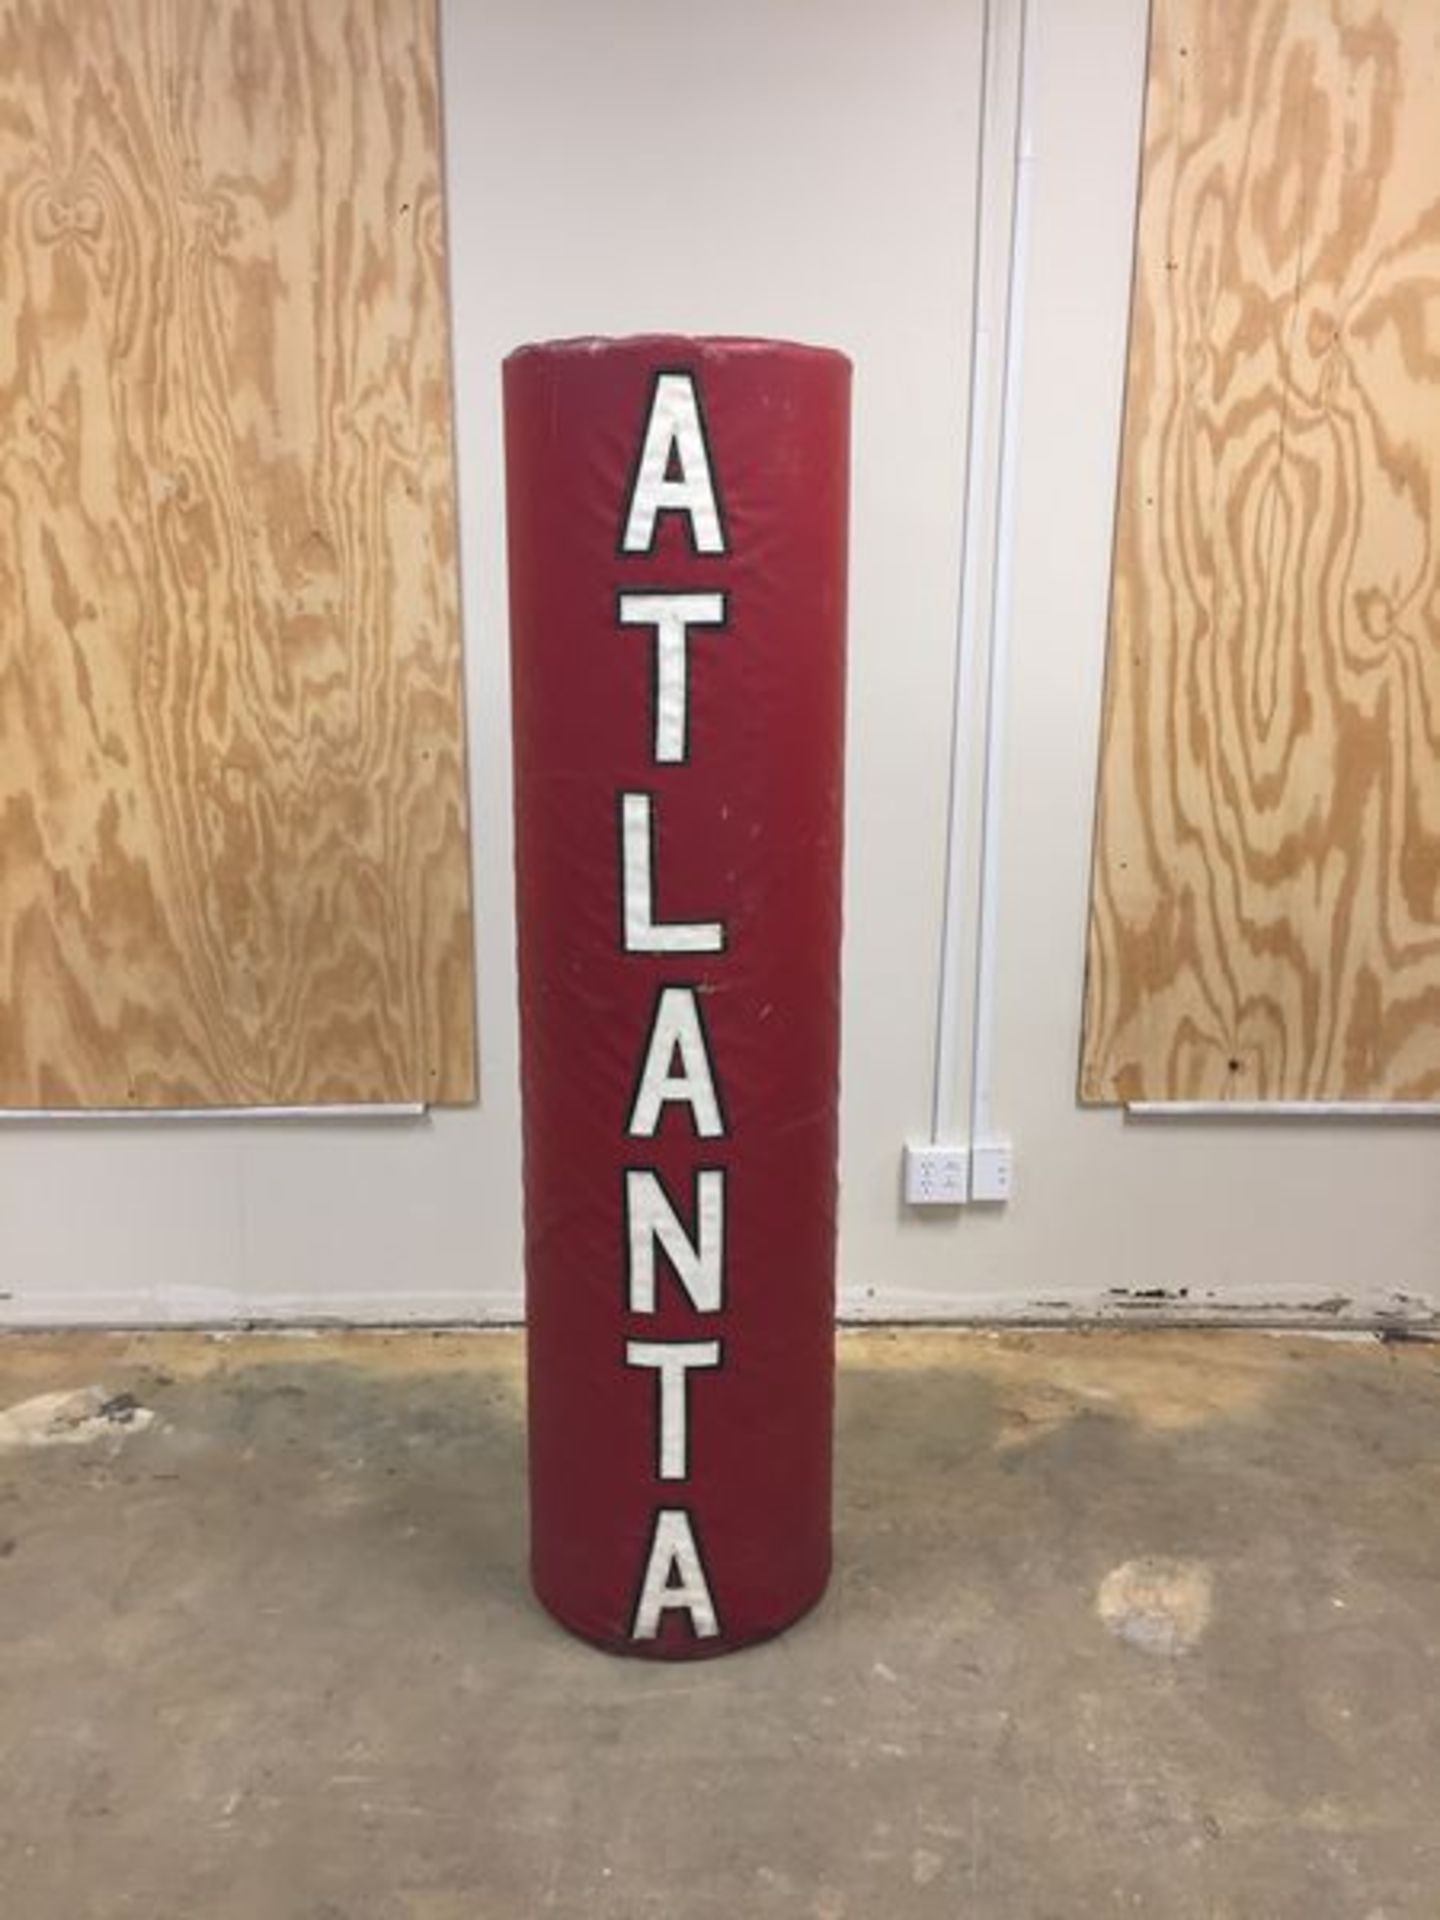 Atlanta"" End-Zone Wrap-Around Pole Pad / Game-Used / This item includes Georgia Dome Authentication